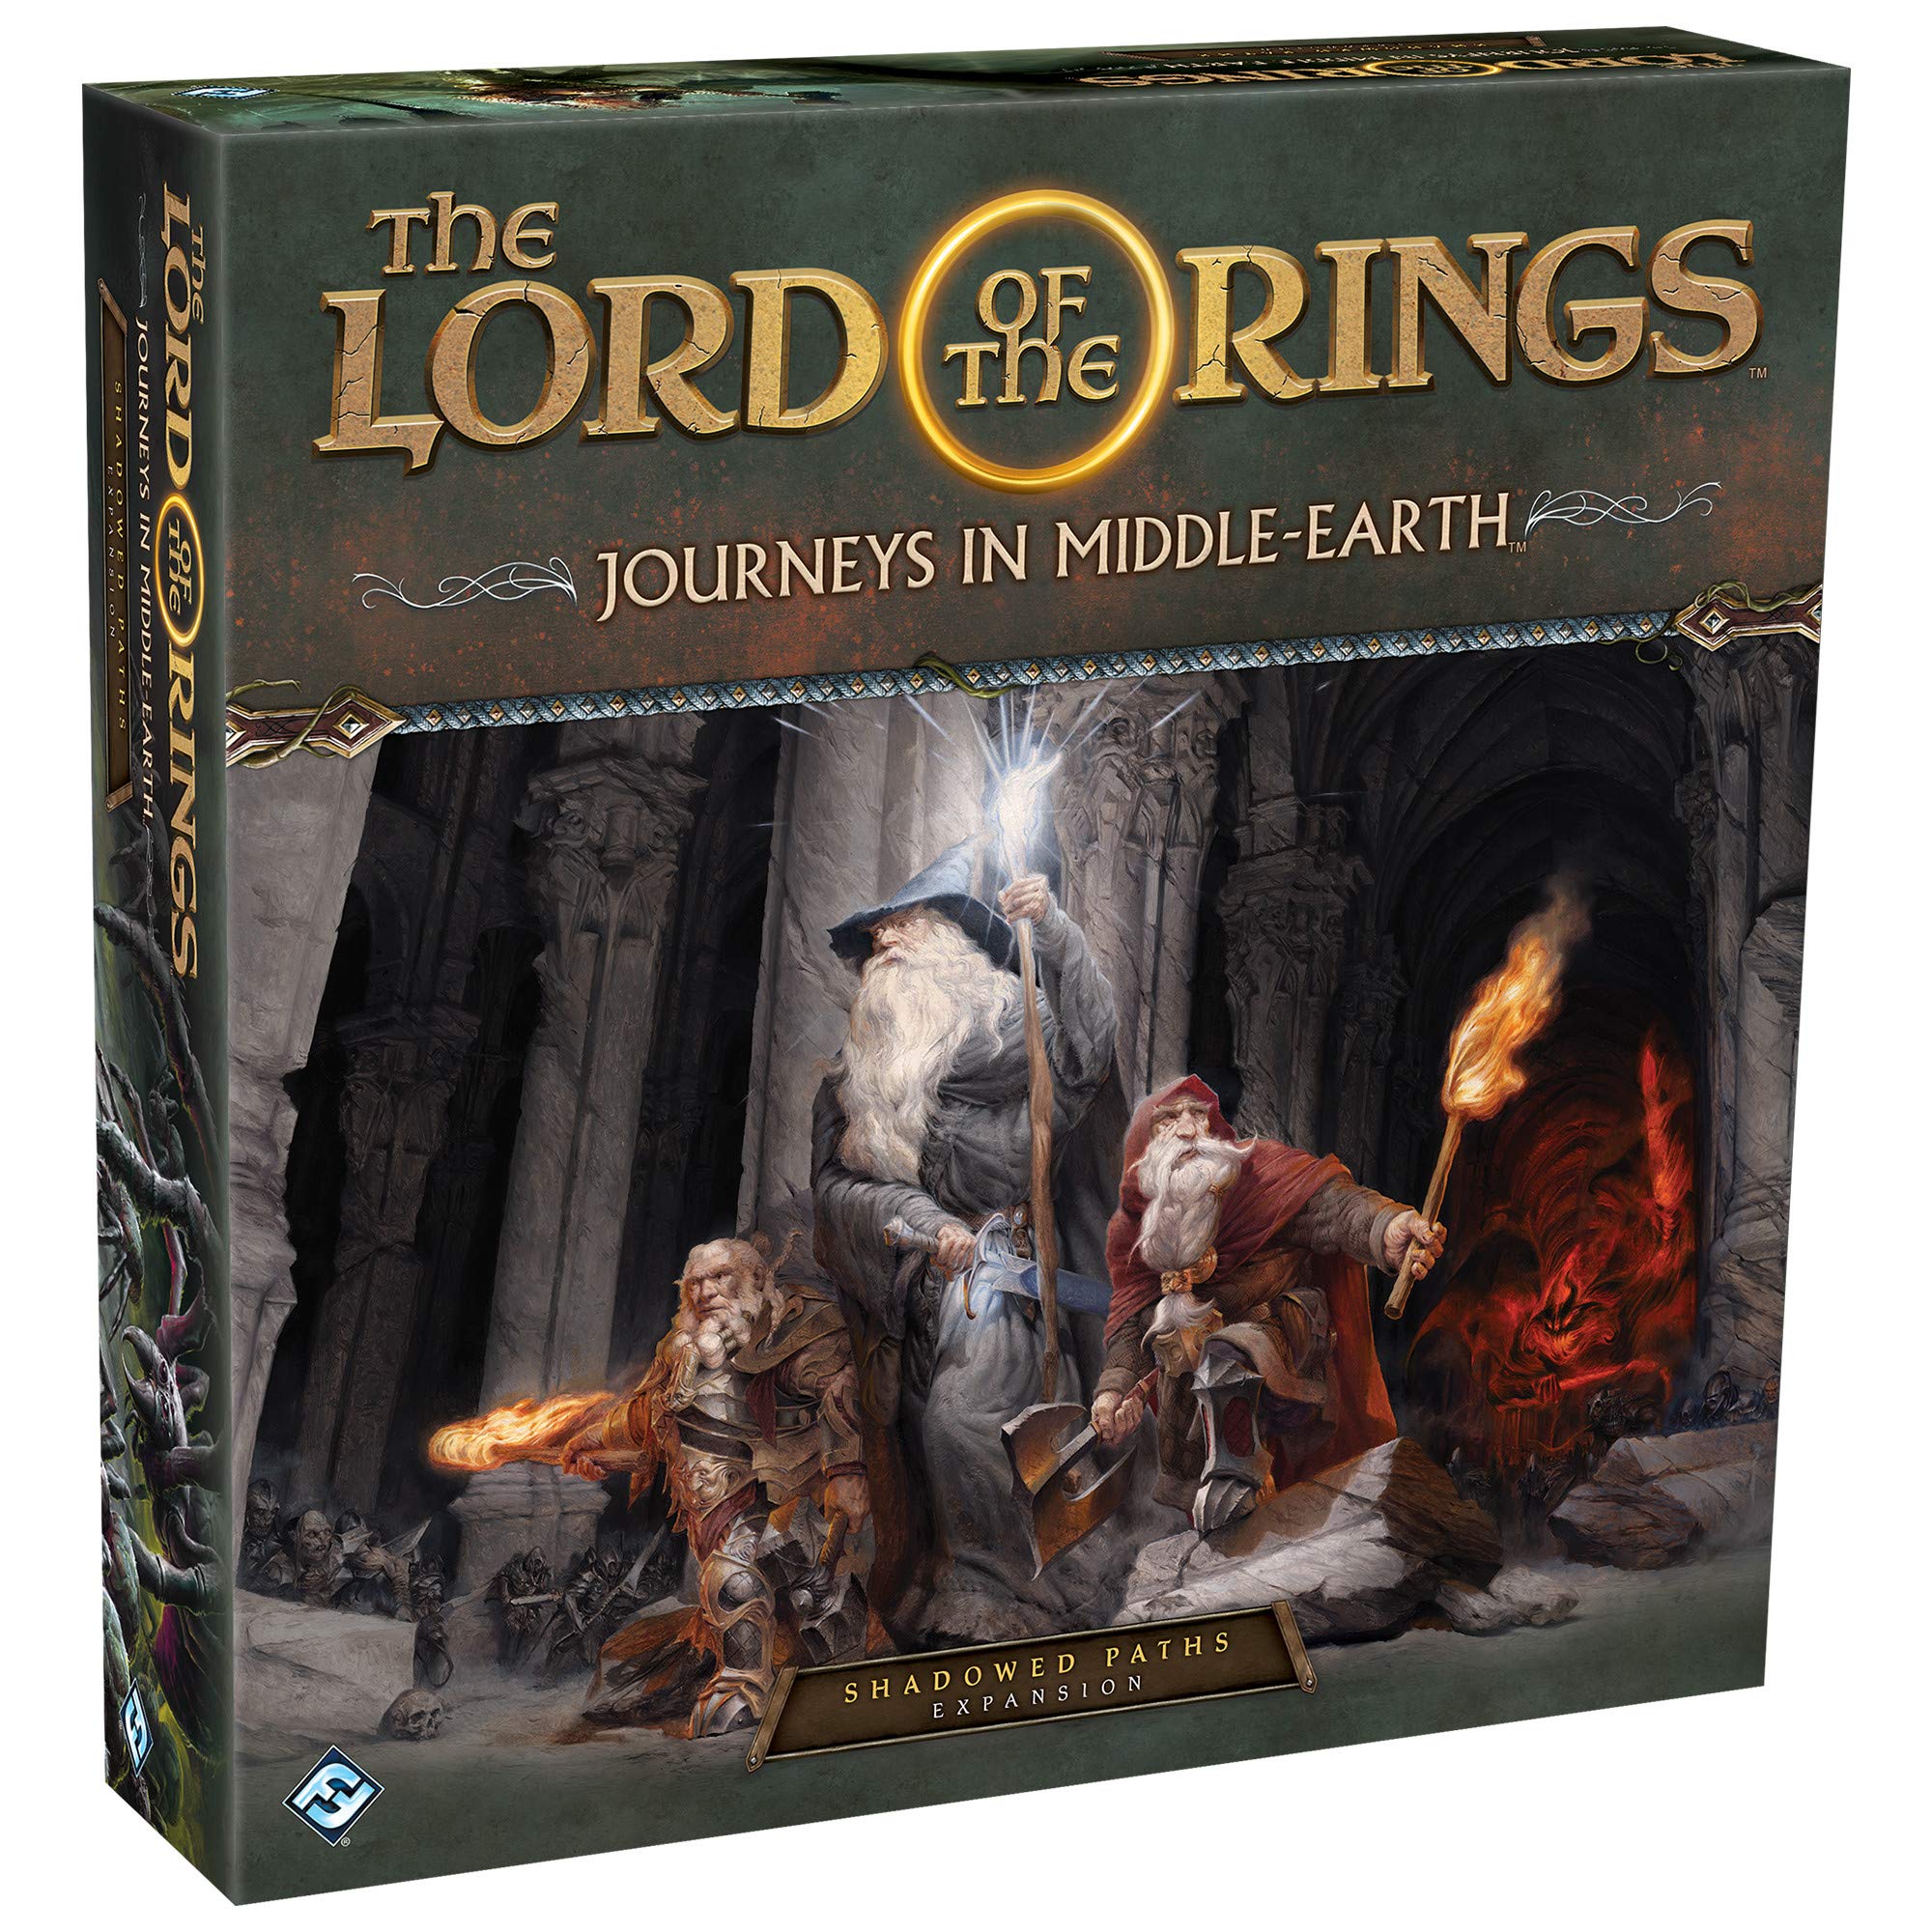 The Lord of the Rings Journeys in Middle-earth Shadowed Paths Board Game EXPANSION - Adventure Board Game for Kids and Adults, Ages 14+, 1-5 Players, 60+ Minute Playtime, Made by Fantasy Flight Games